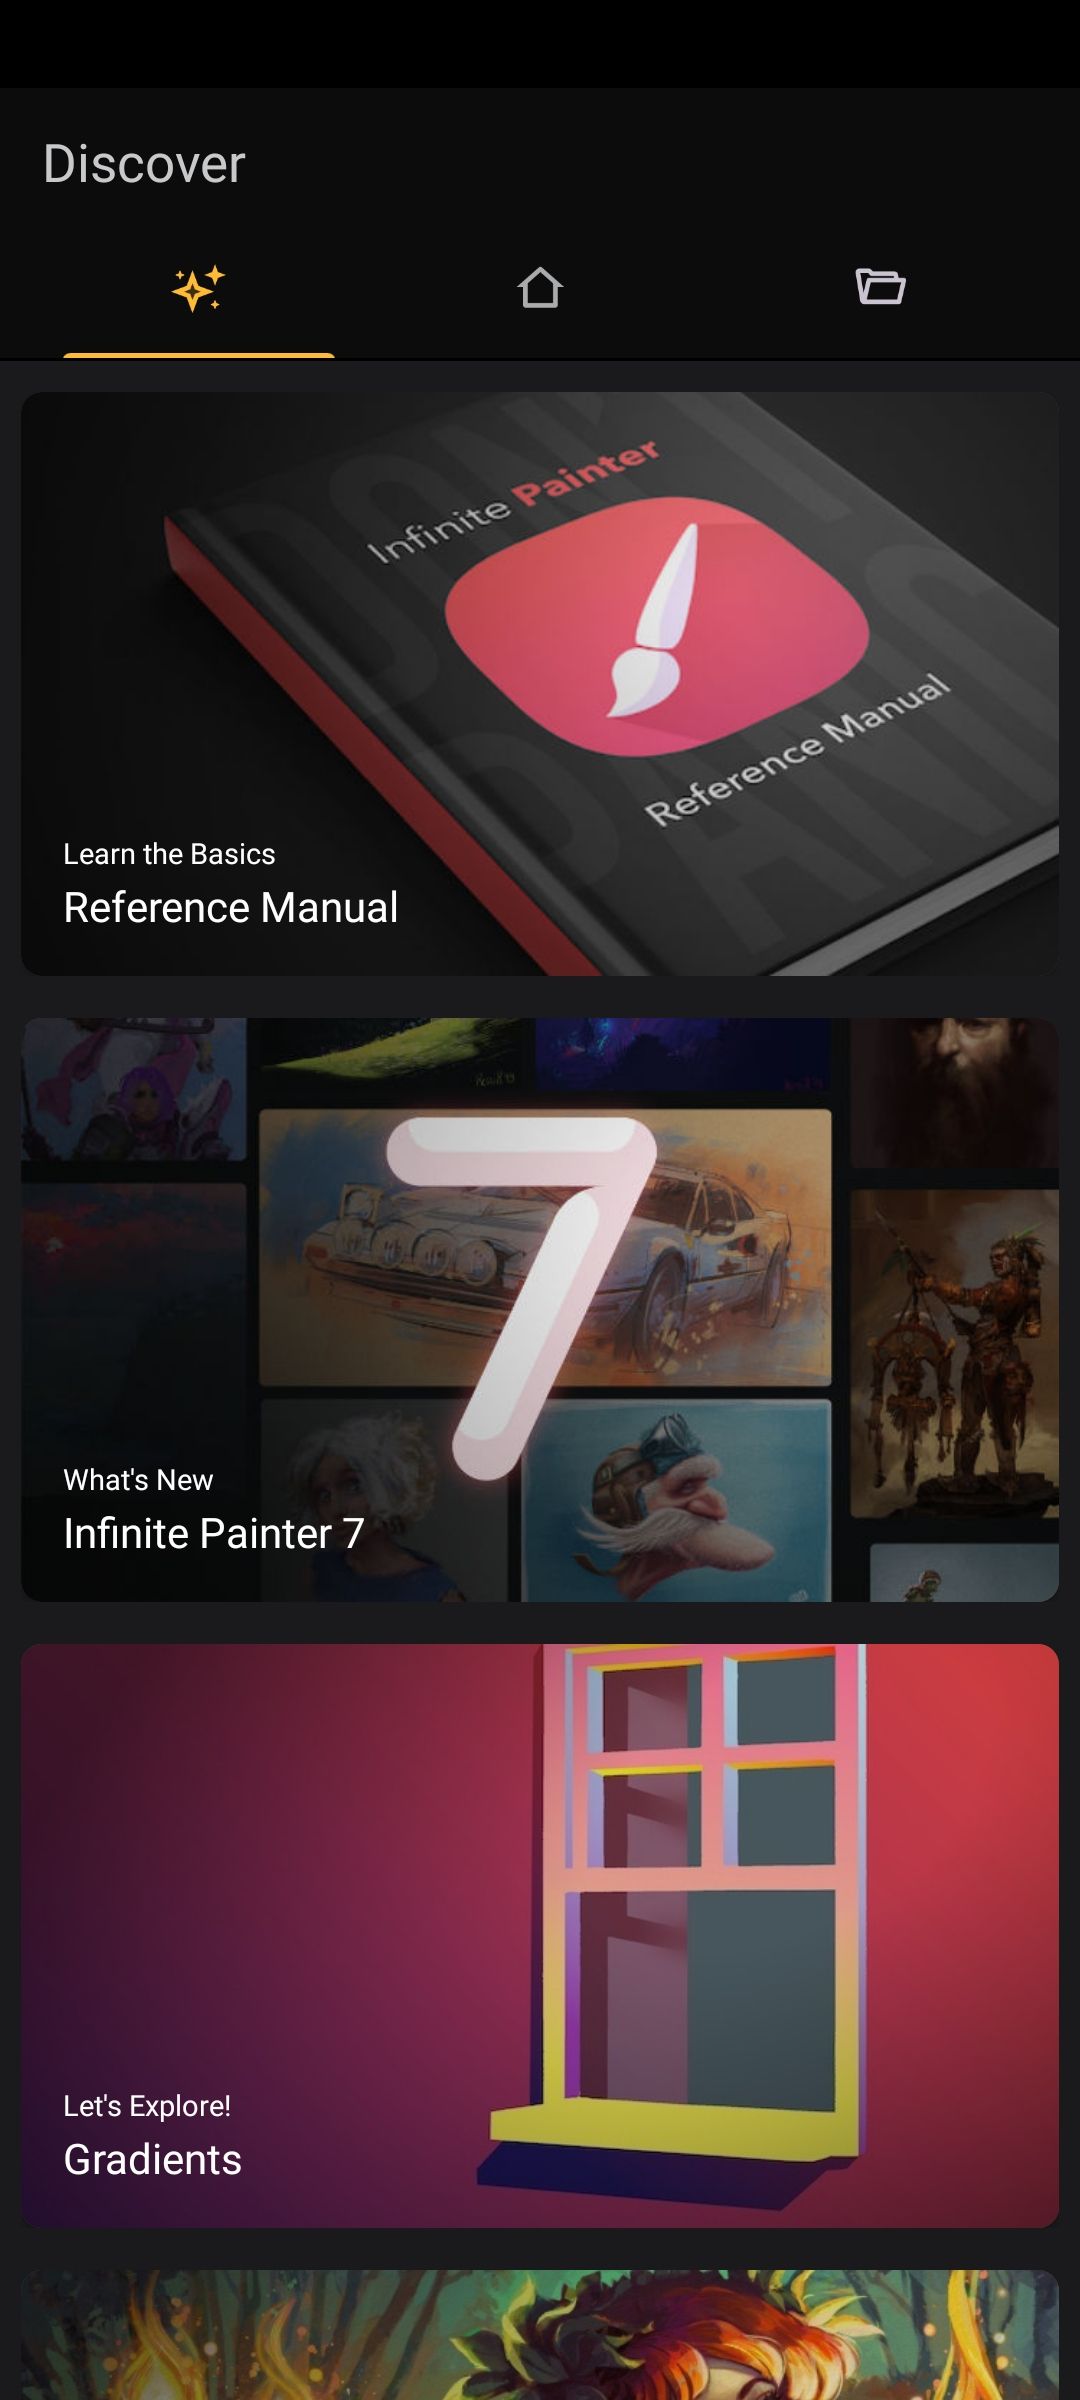 Infinite Painter Discover page